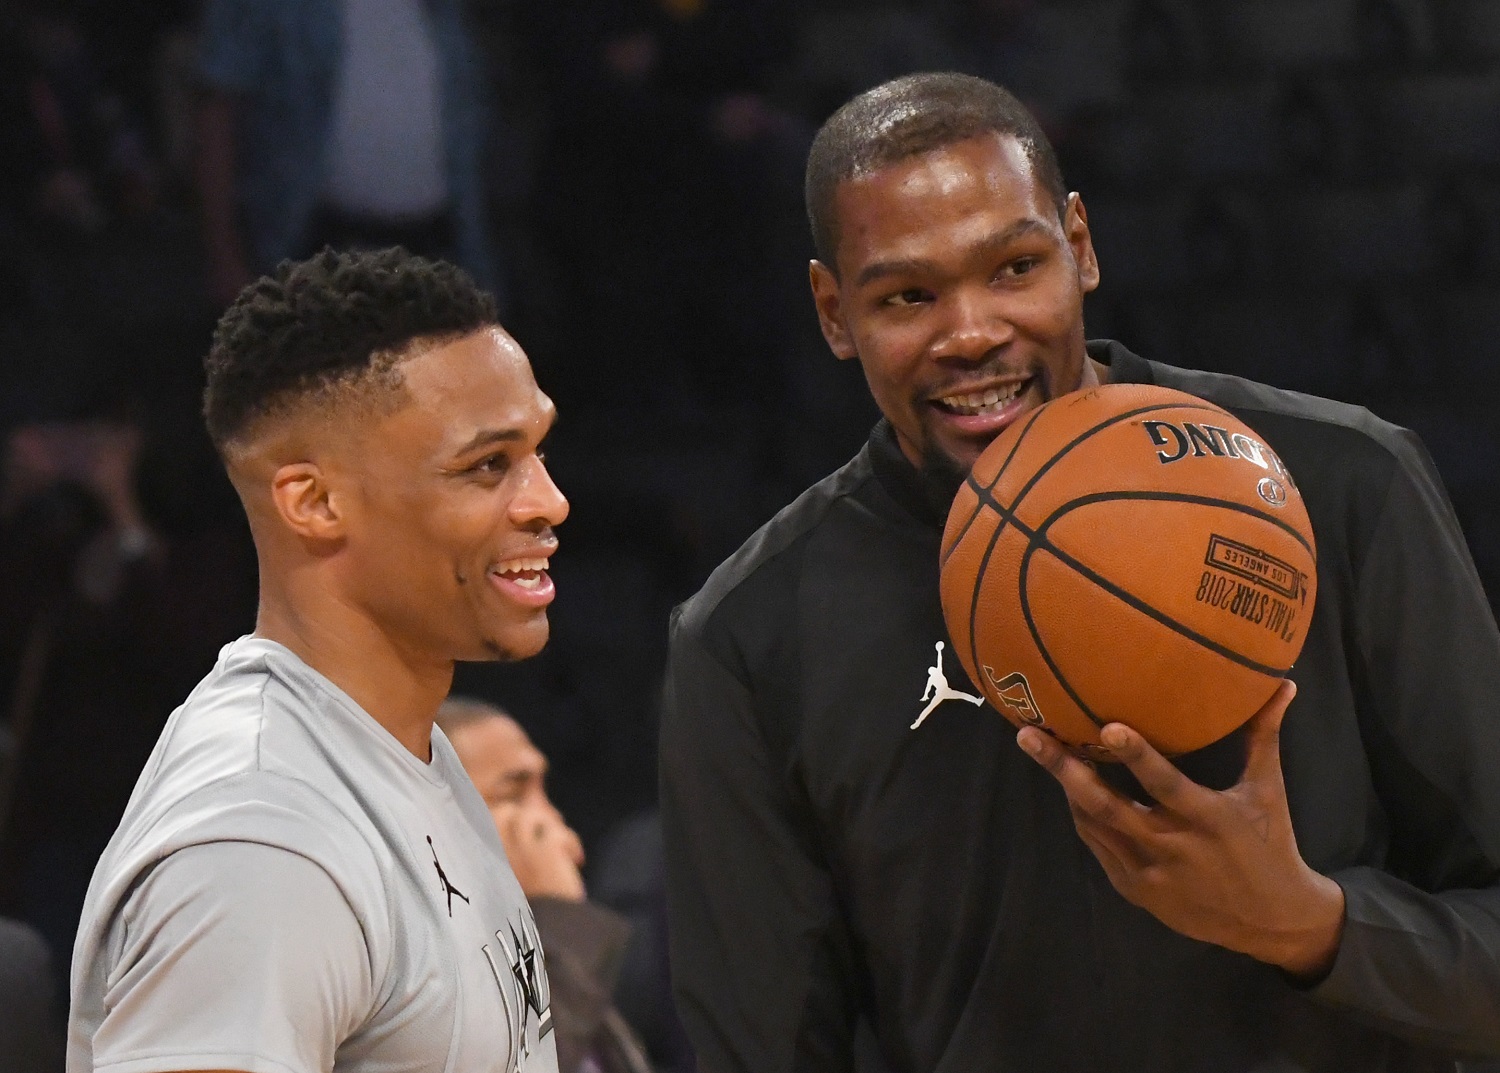 Russell Westbrook and Kevin Durant warm up before the 2018 NBA All-Star Game